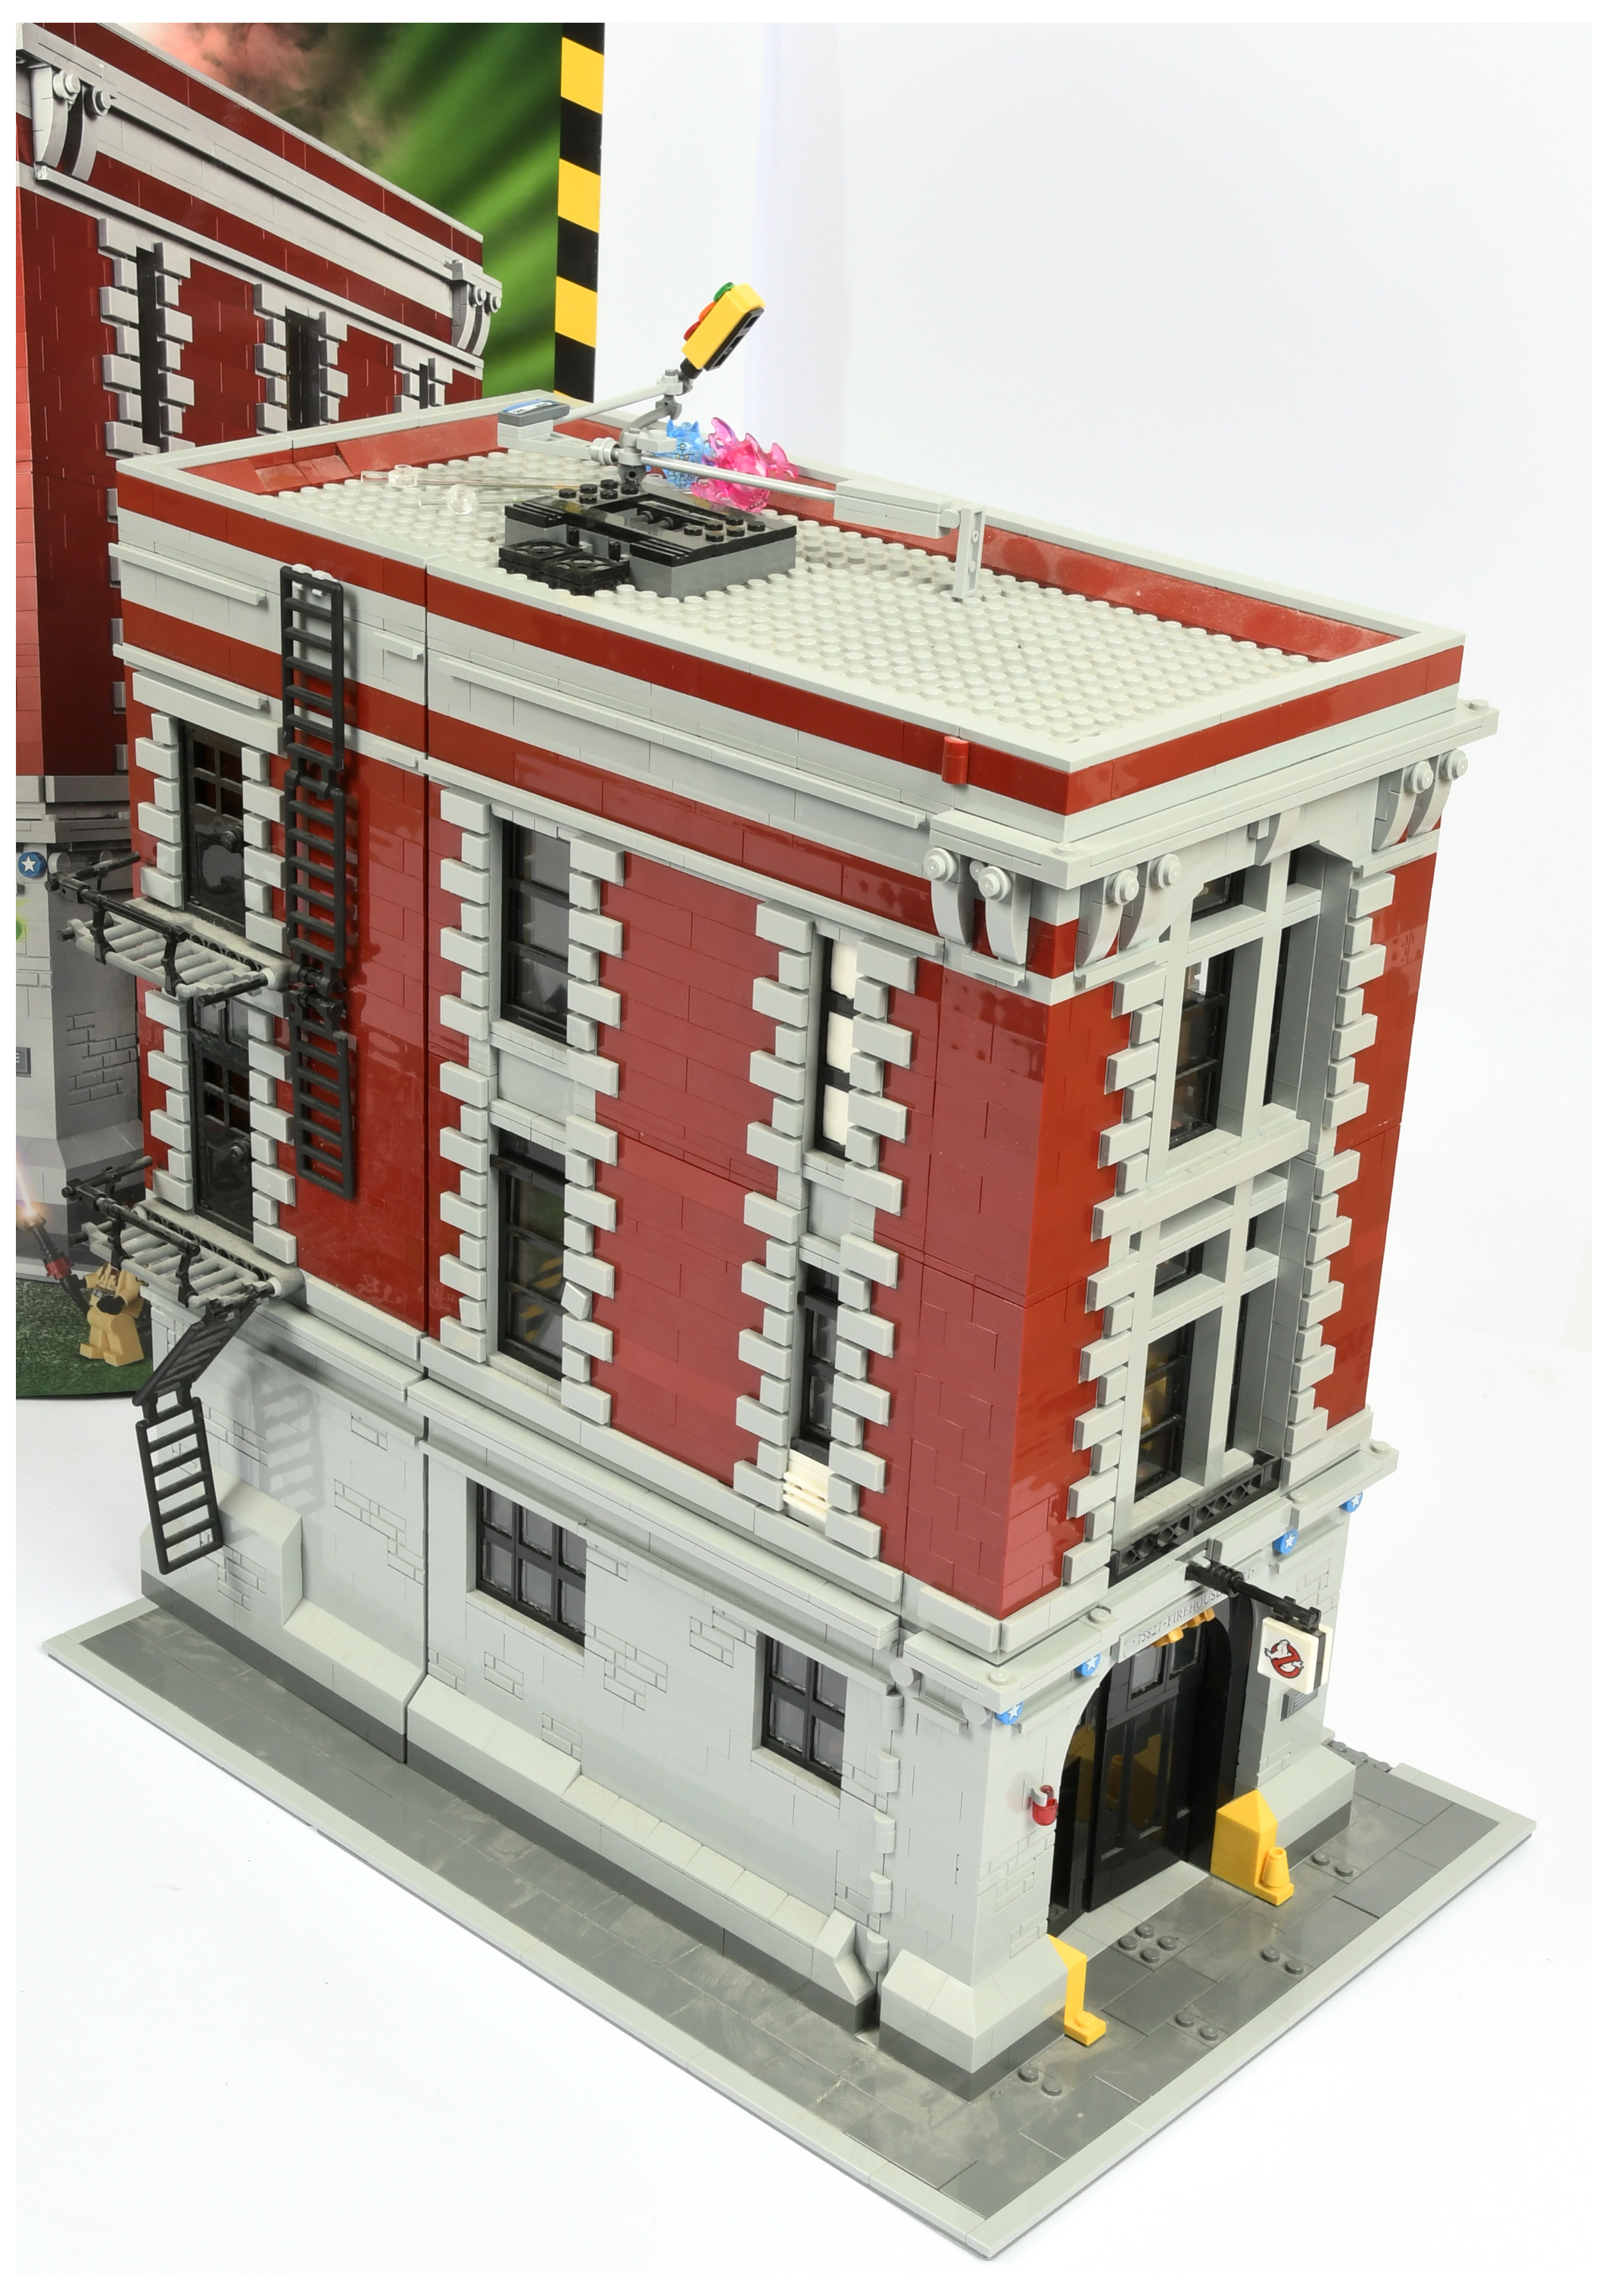 Lego 75827 -"Ghostbusters" Fire House Headquarters - built model, with instructions, includes som... - Image 2 of 2